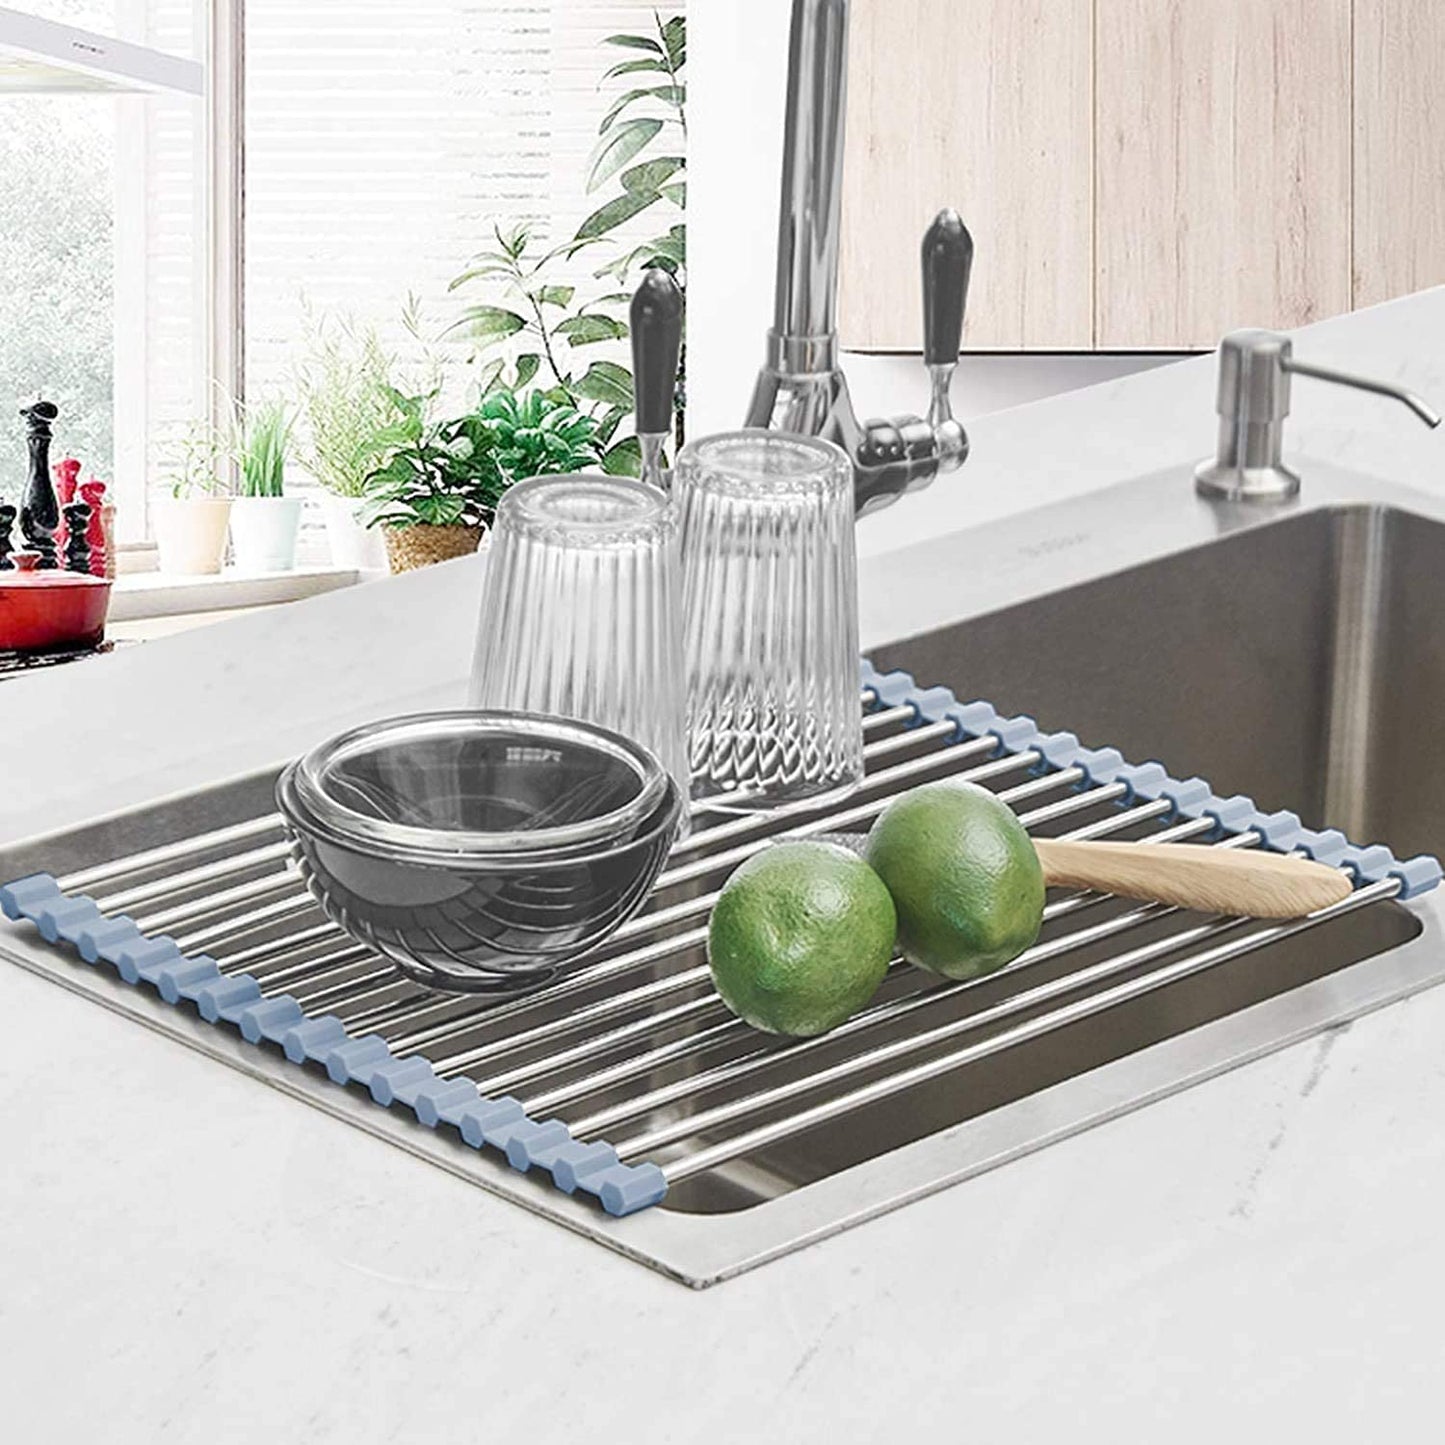 Roll up Dish Drying Rack,  Roll over the Sink Dish Drying Rack Kitchen Rolling Dish Drainer, Foldable Sink Rack Mat Stainless Steel Wire Dish Drying Rack for Kitchen Sink Counter (17.5''X11.8'')